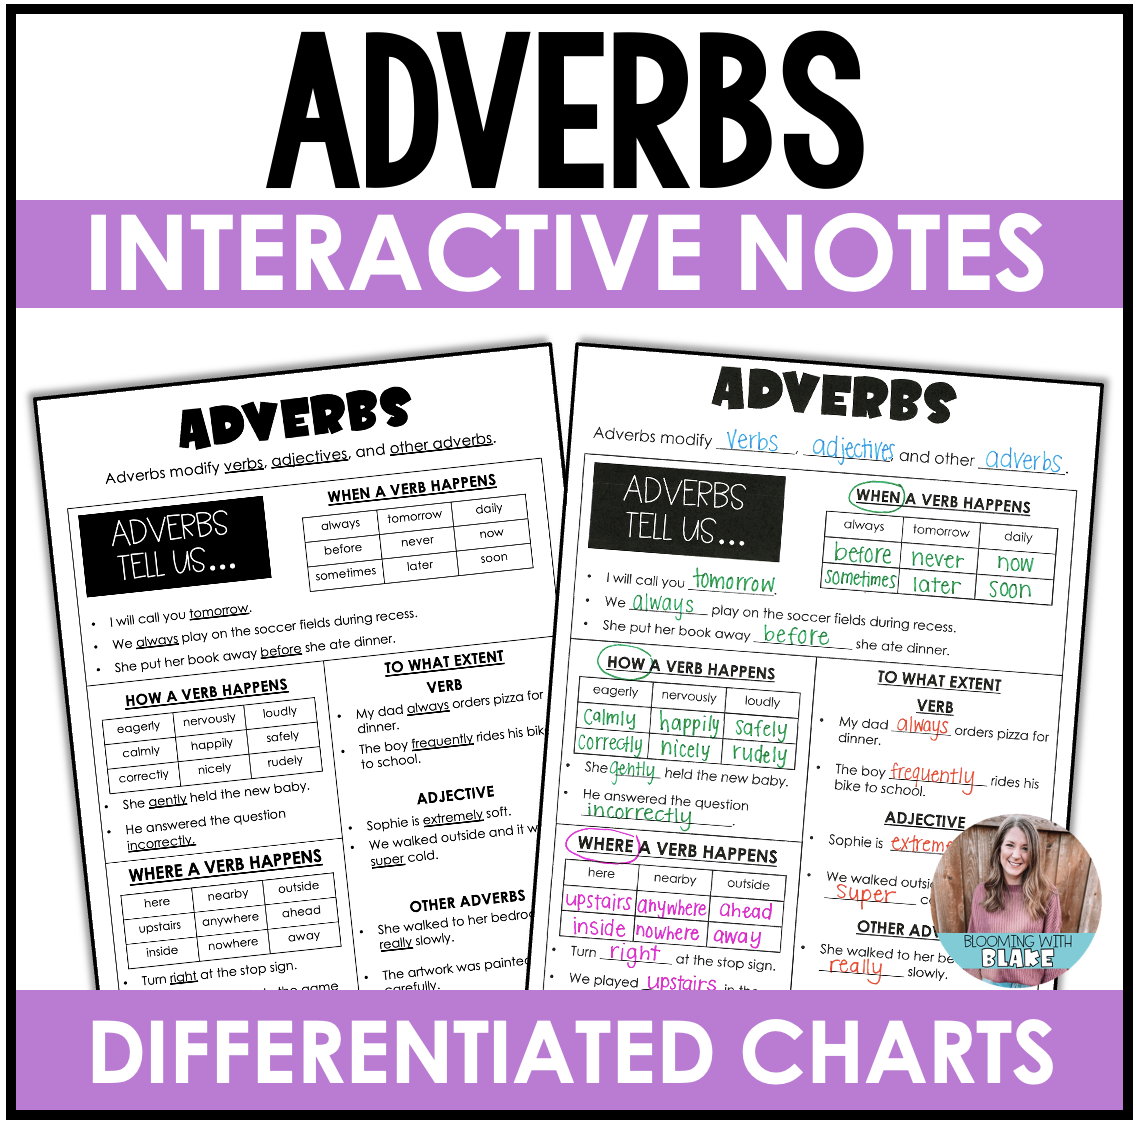 Adverbs Anchor Charts and Notebook Pages for 3rd, 4th, and 5th Grade